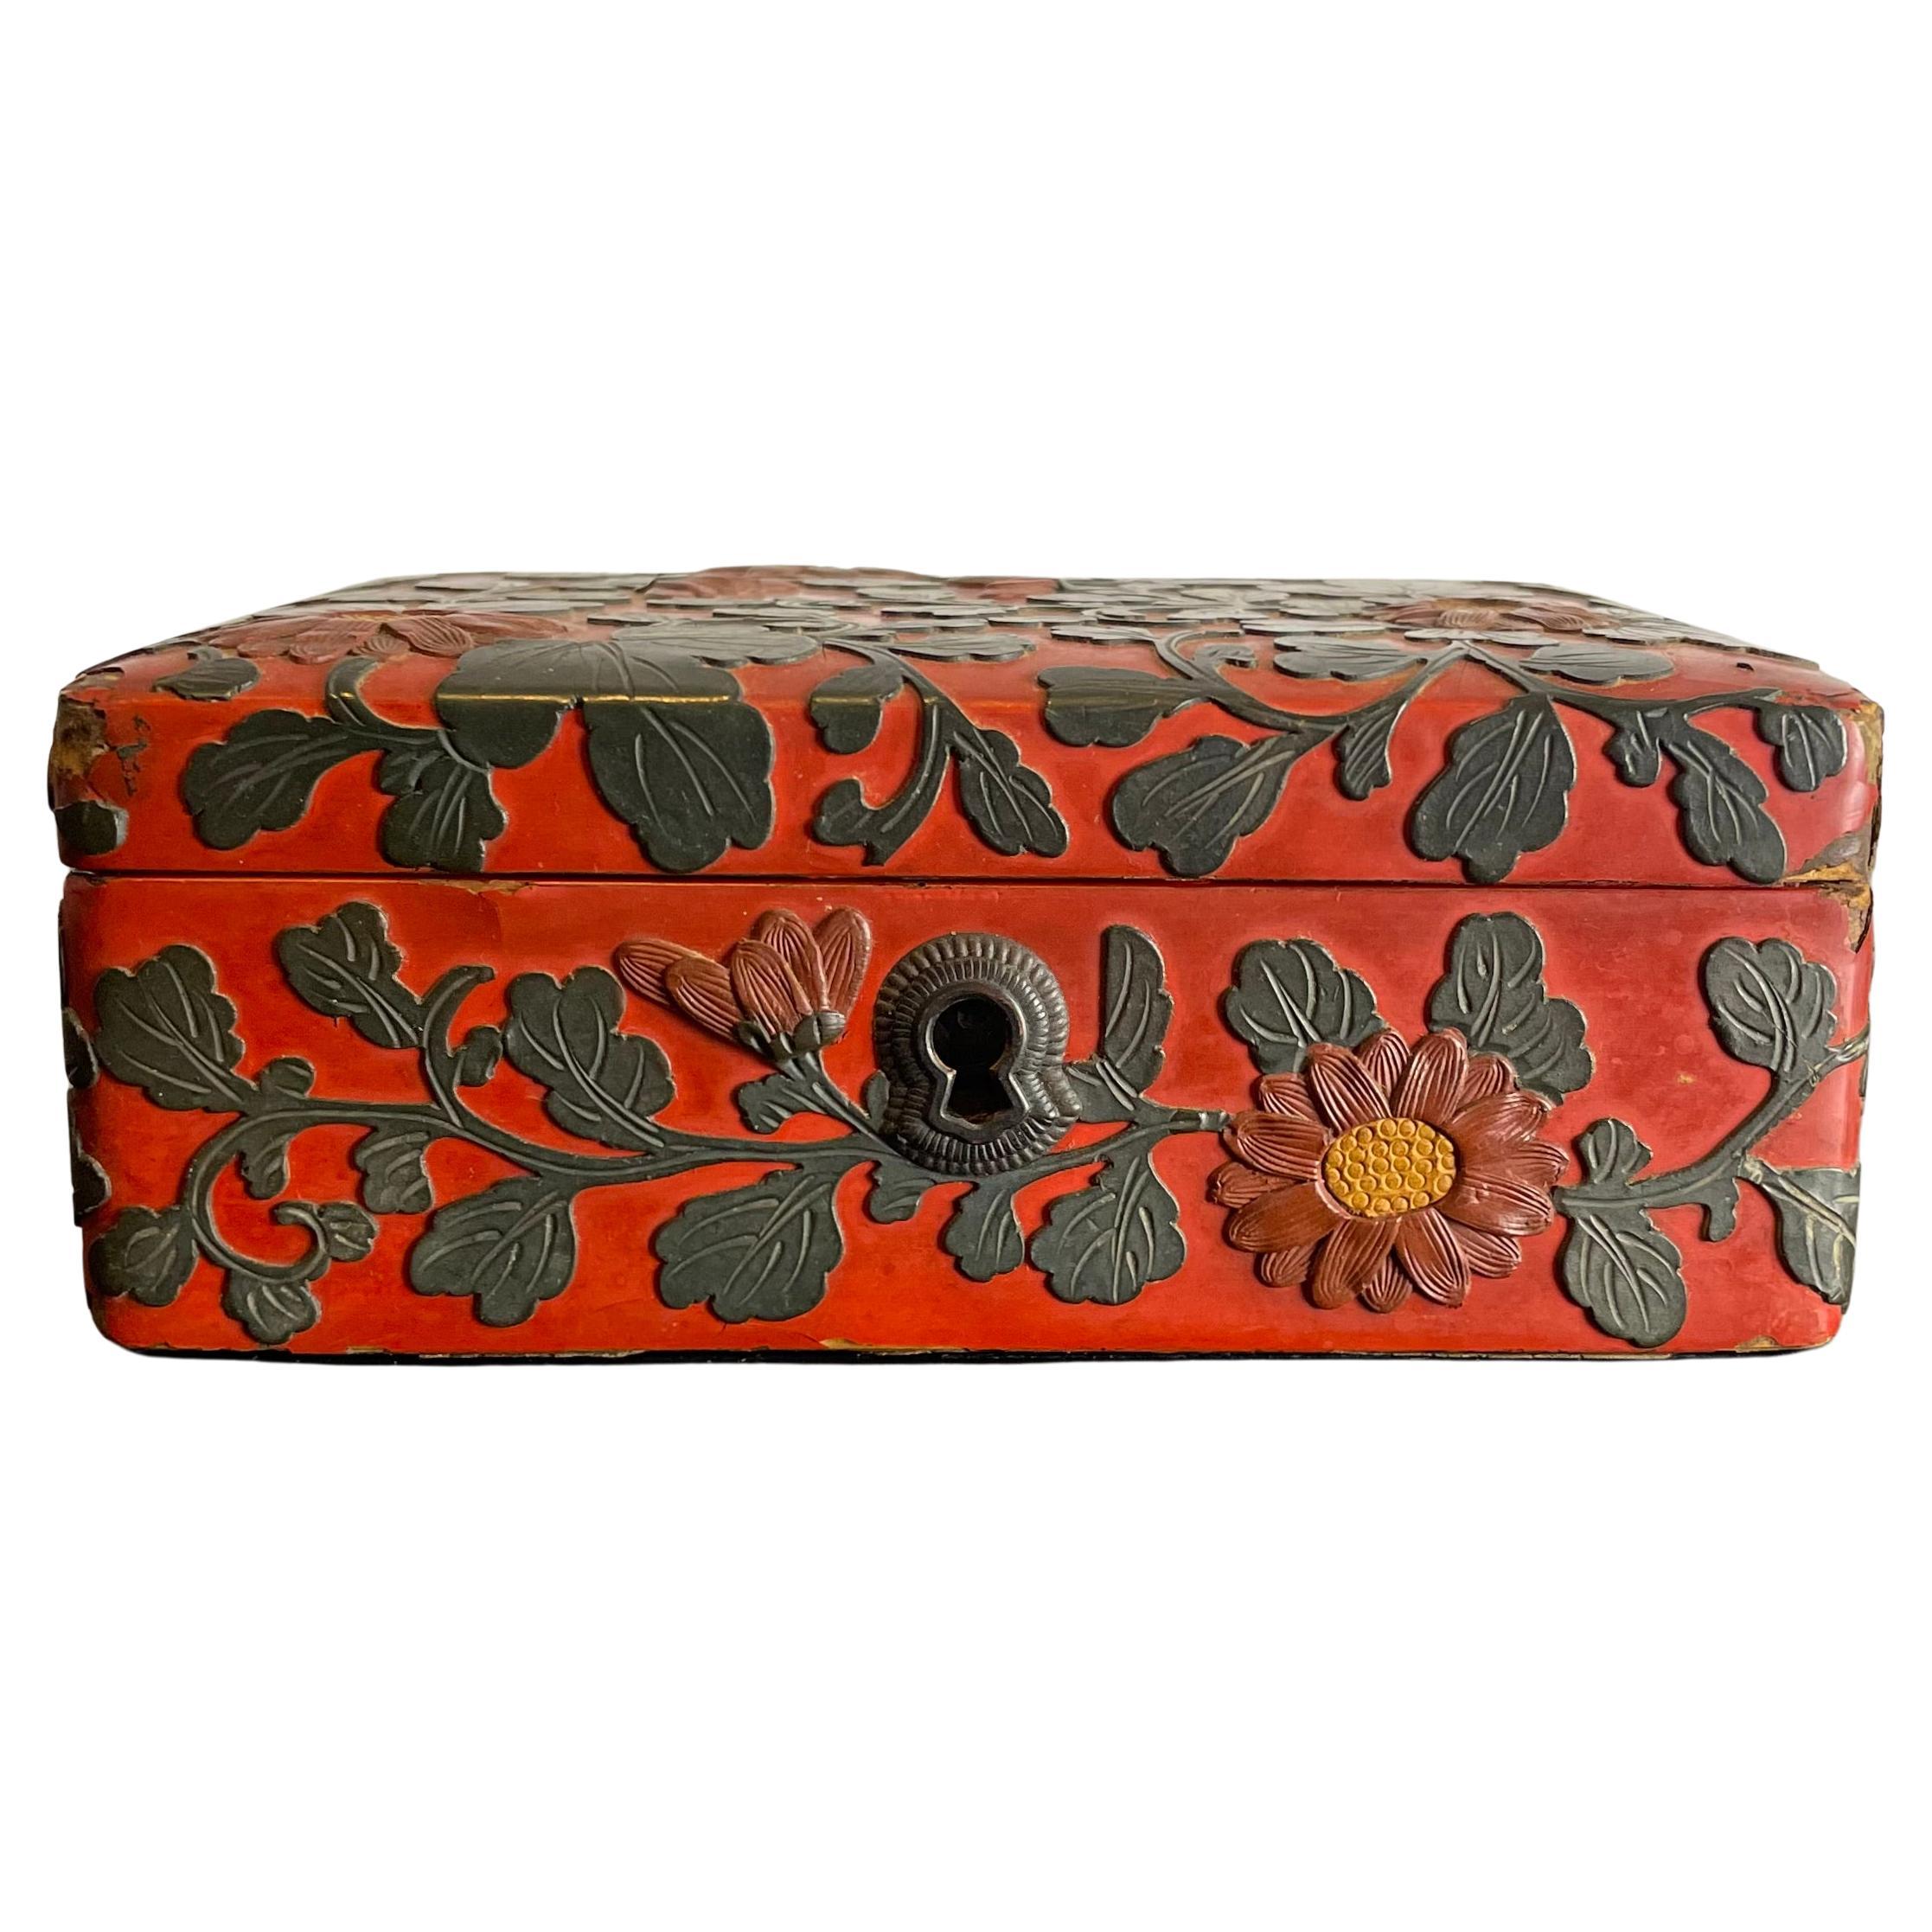 Chinese Box Cinnabar Lacquered Red and Black, 19th Century